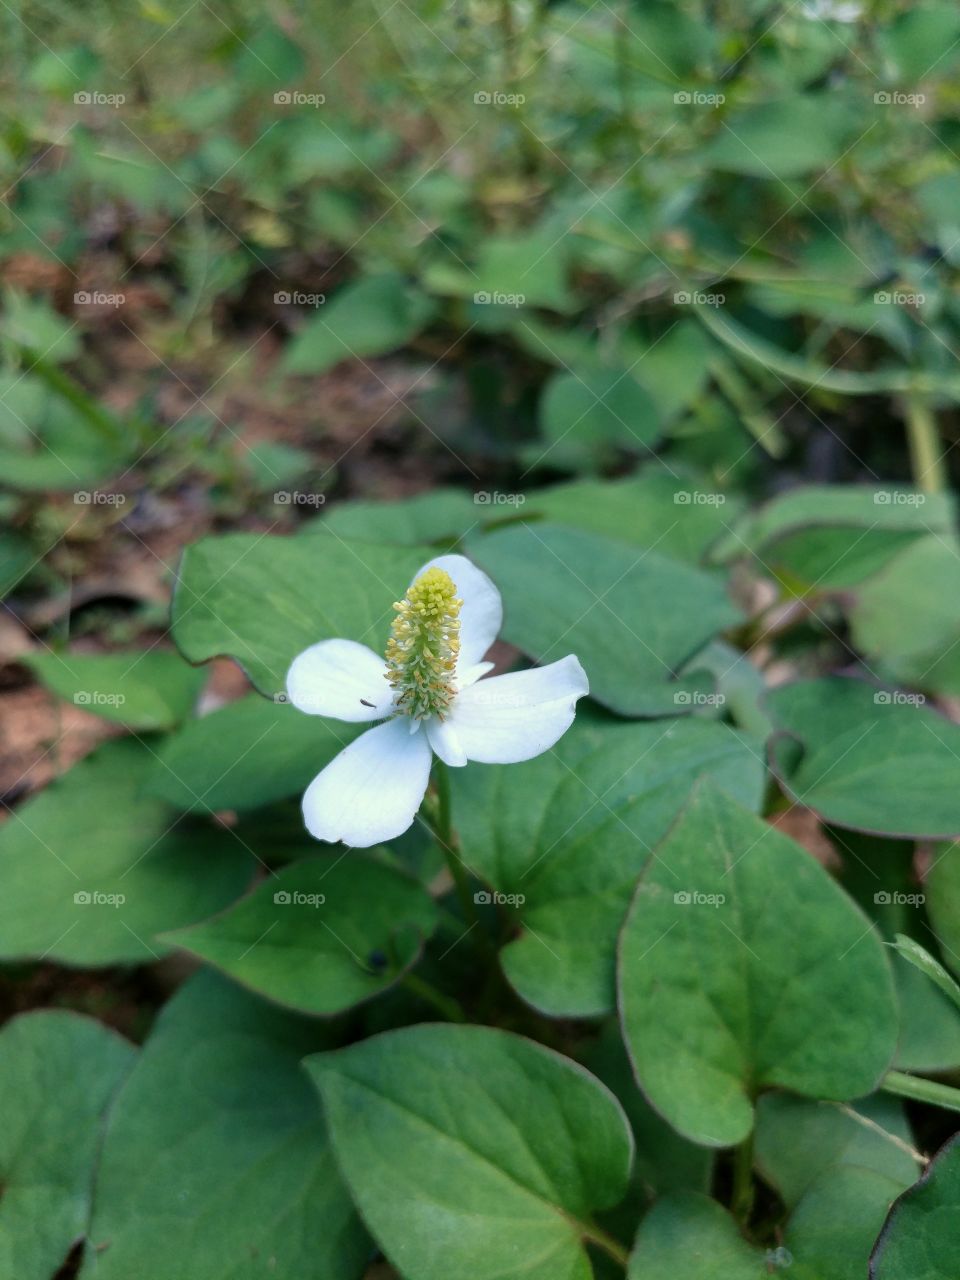 A single, white, Houttuynia cordata (Chameleon Plant) bloom sitting among its heart-shaped leaves.